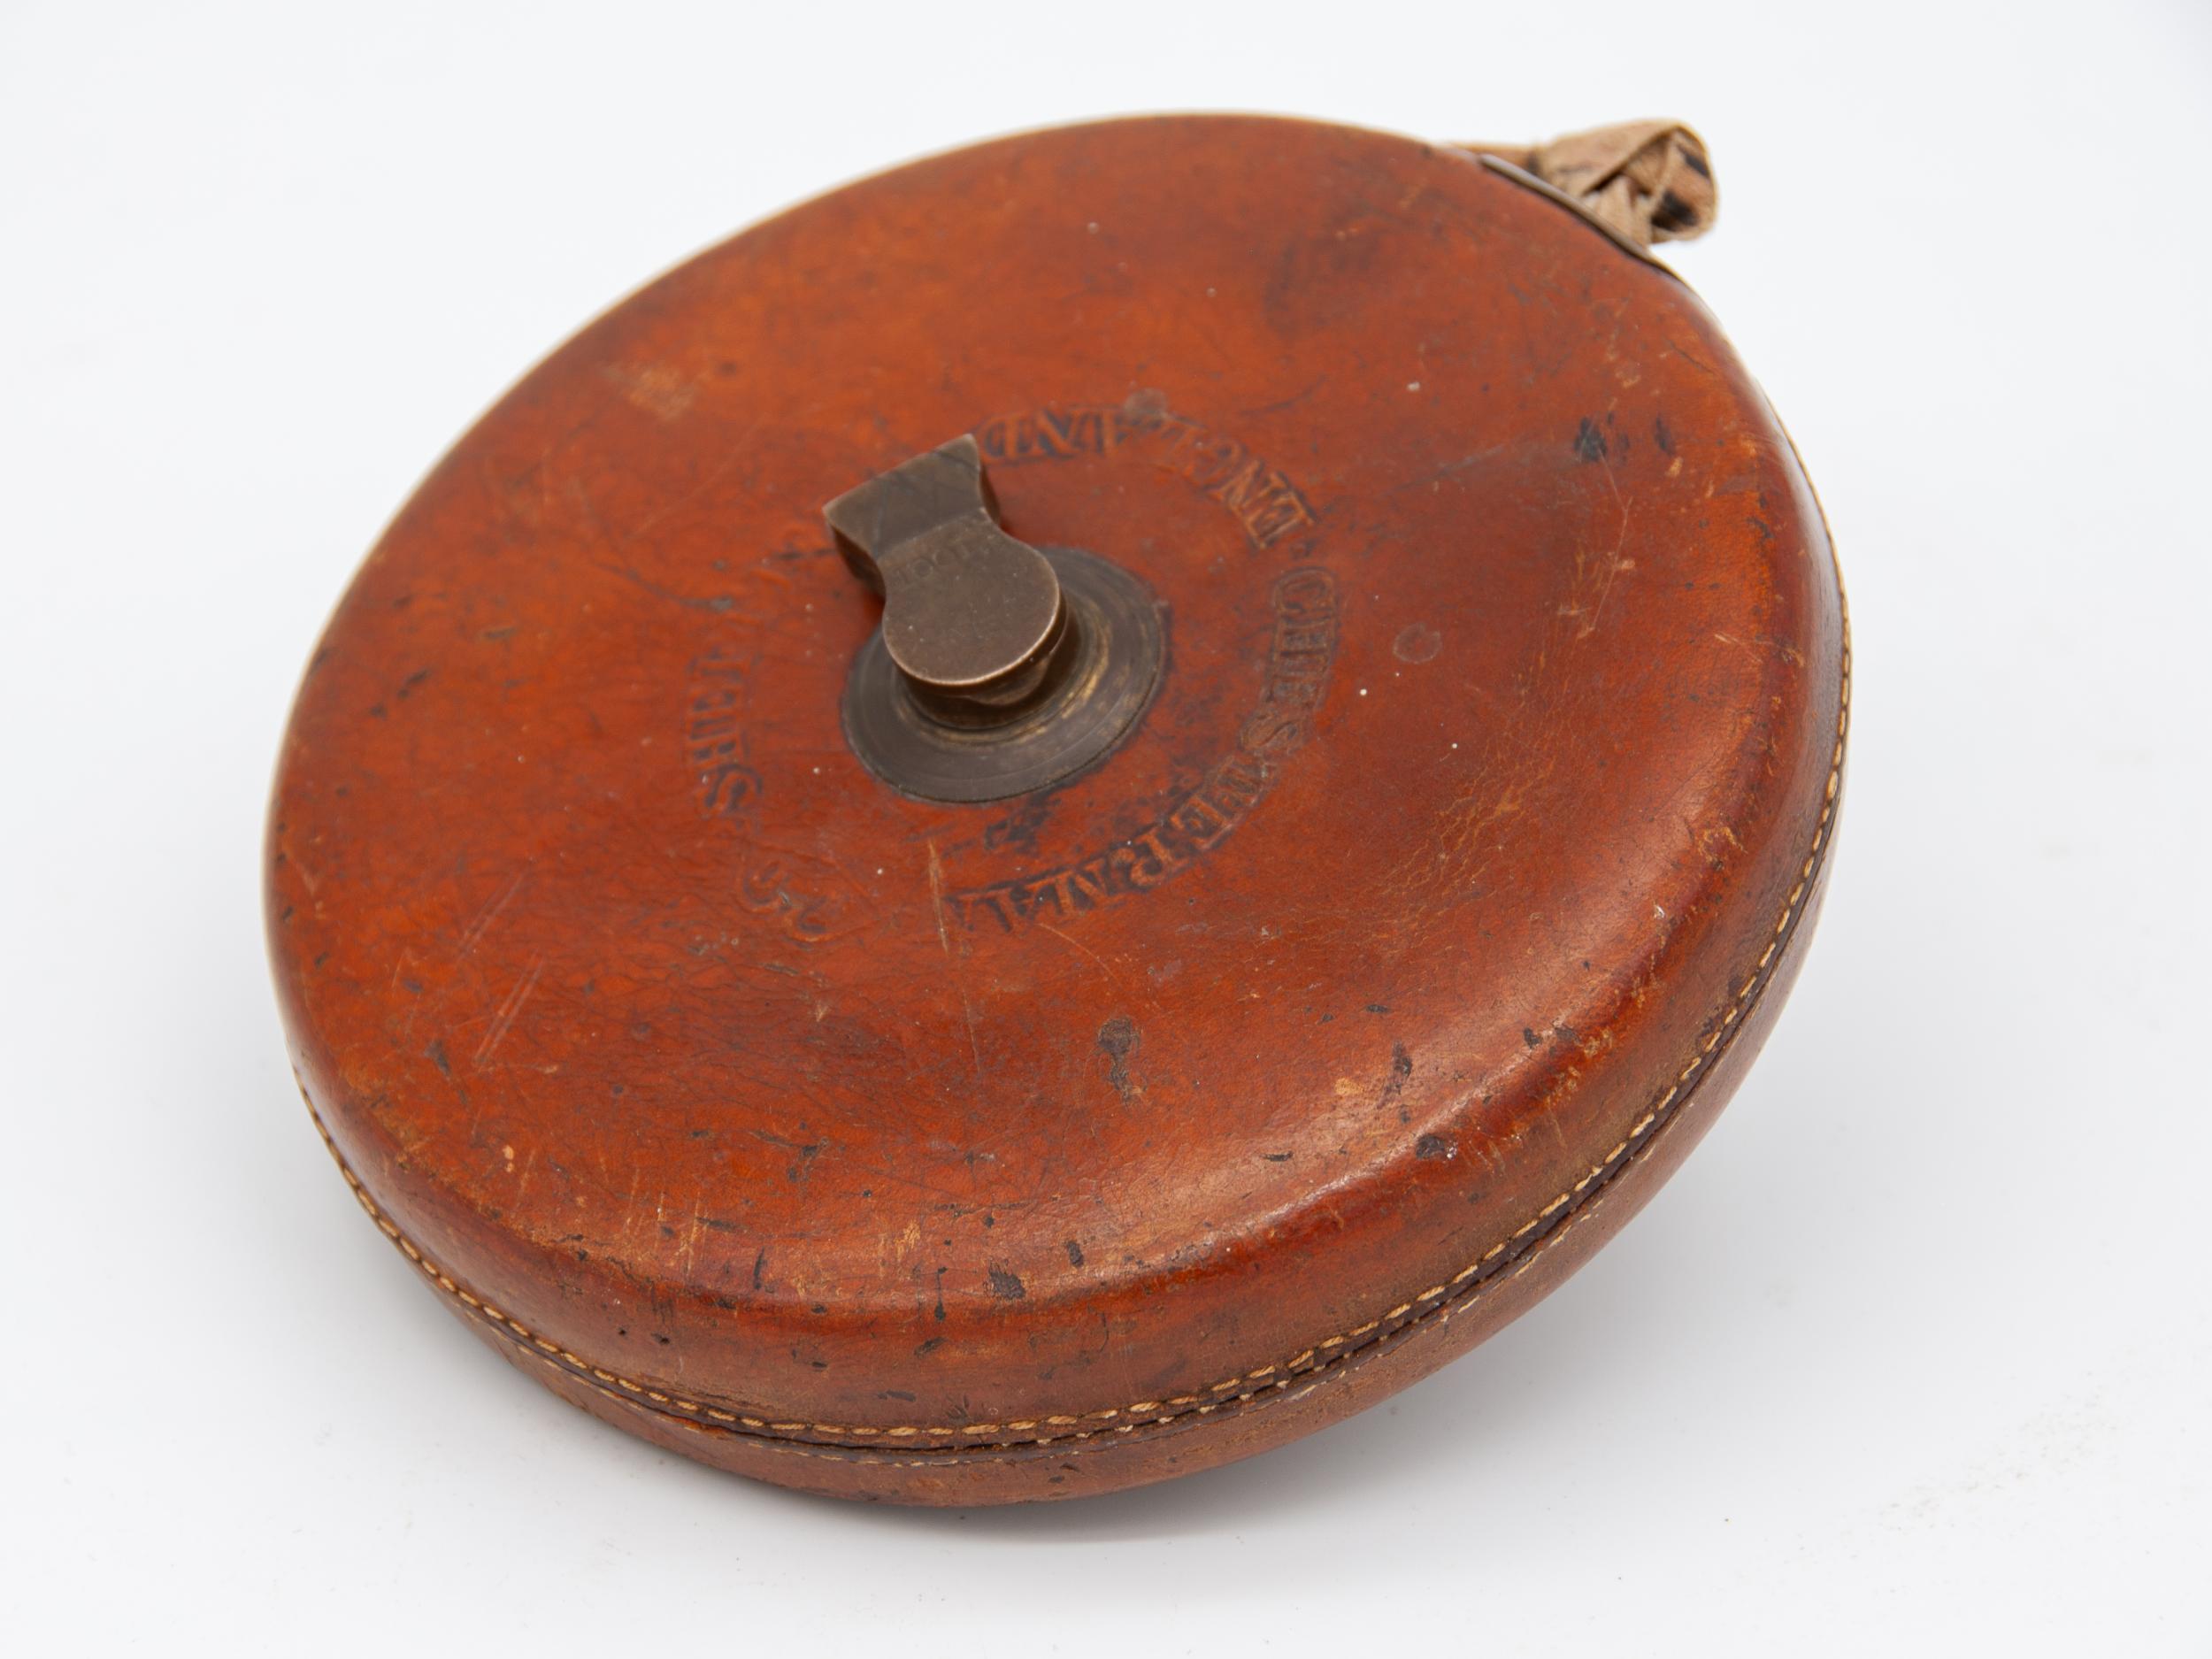 Measuring tape in camel leather wrapped casing. Has a brass knob on one side to wind the tape back up. Measuring tape itself is a waxed cotton with distinct inch measurements despite being produced in the UK, circa 1900.